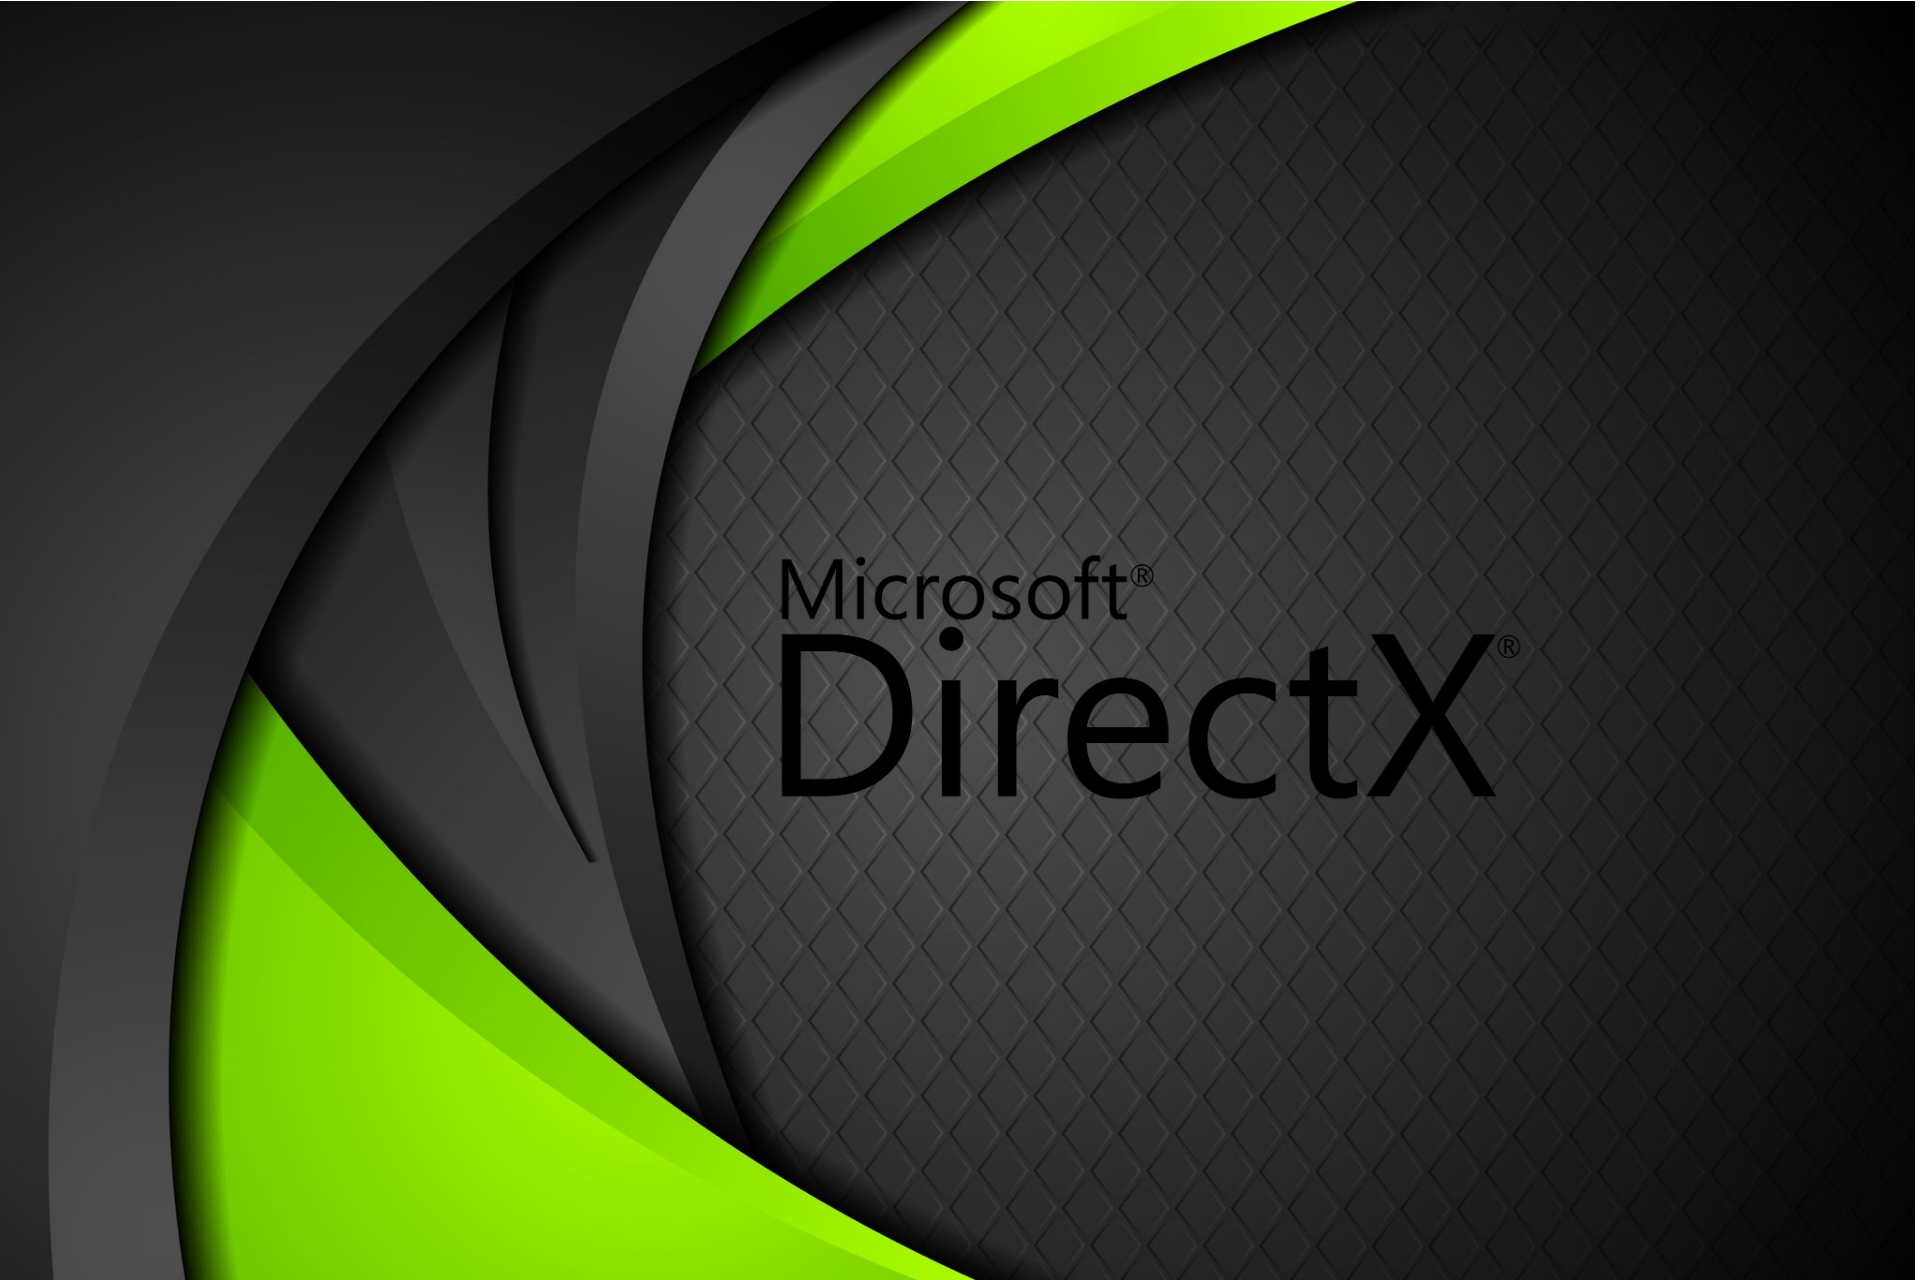 DirectX 11 and DirectX 12: Which One is Better?